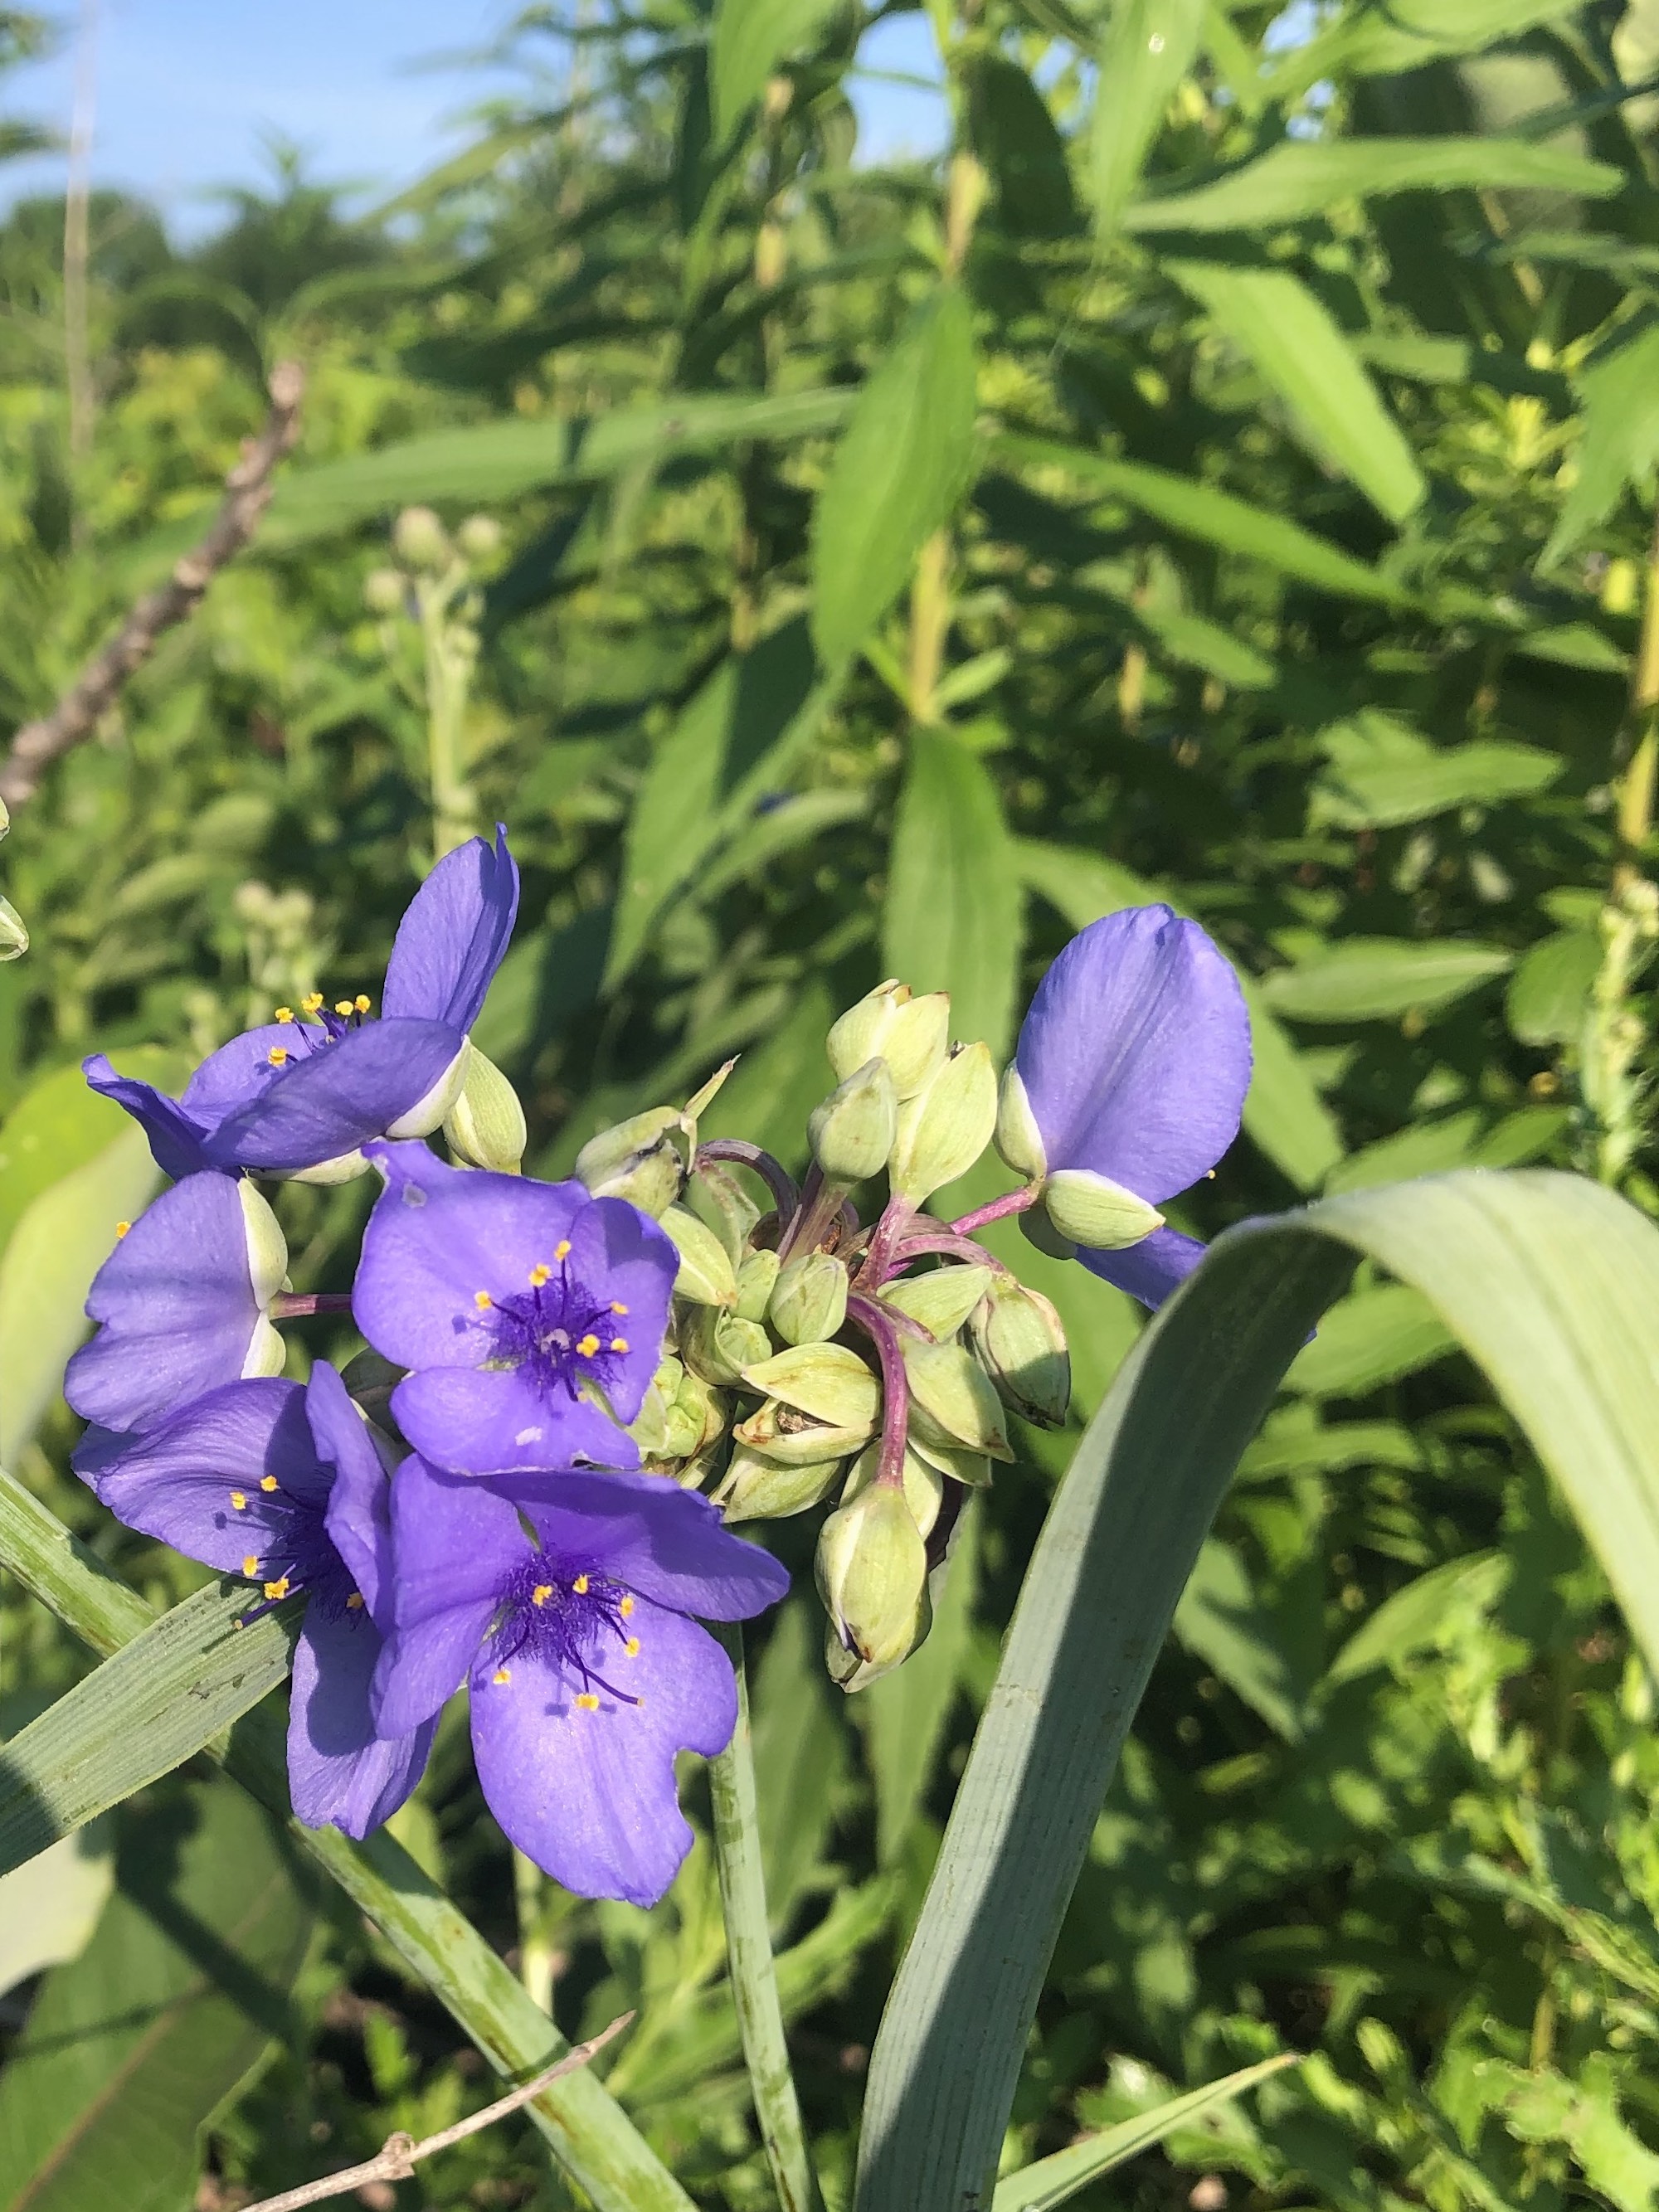 Spiderwort on bank of Marion Dunn Pond on July 5, 2020.